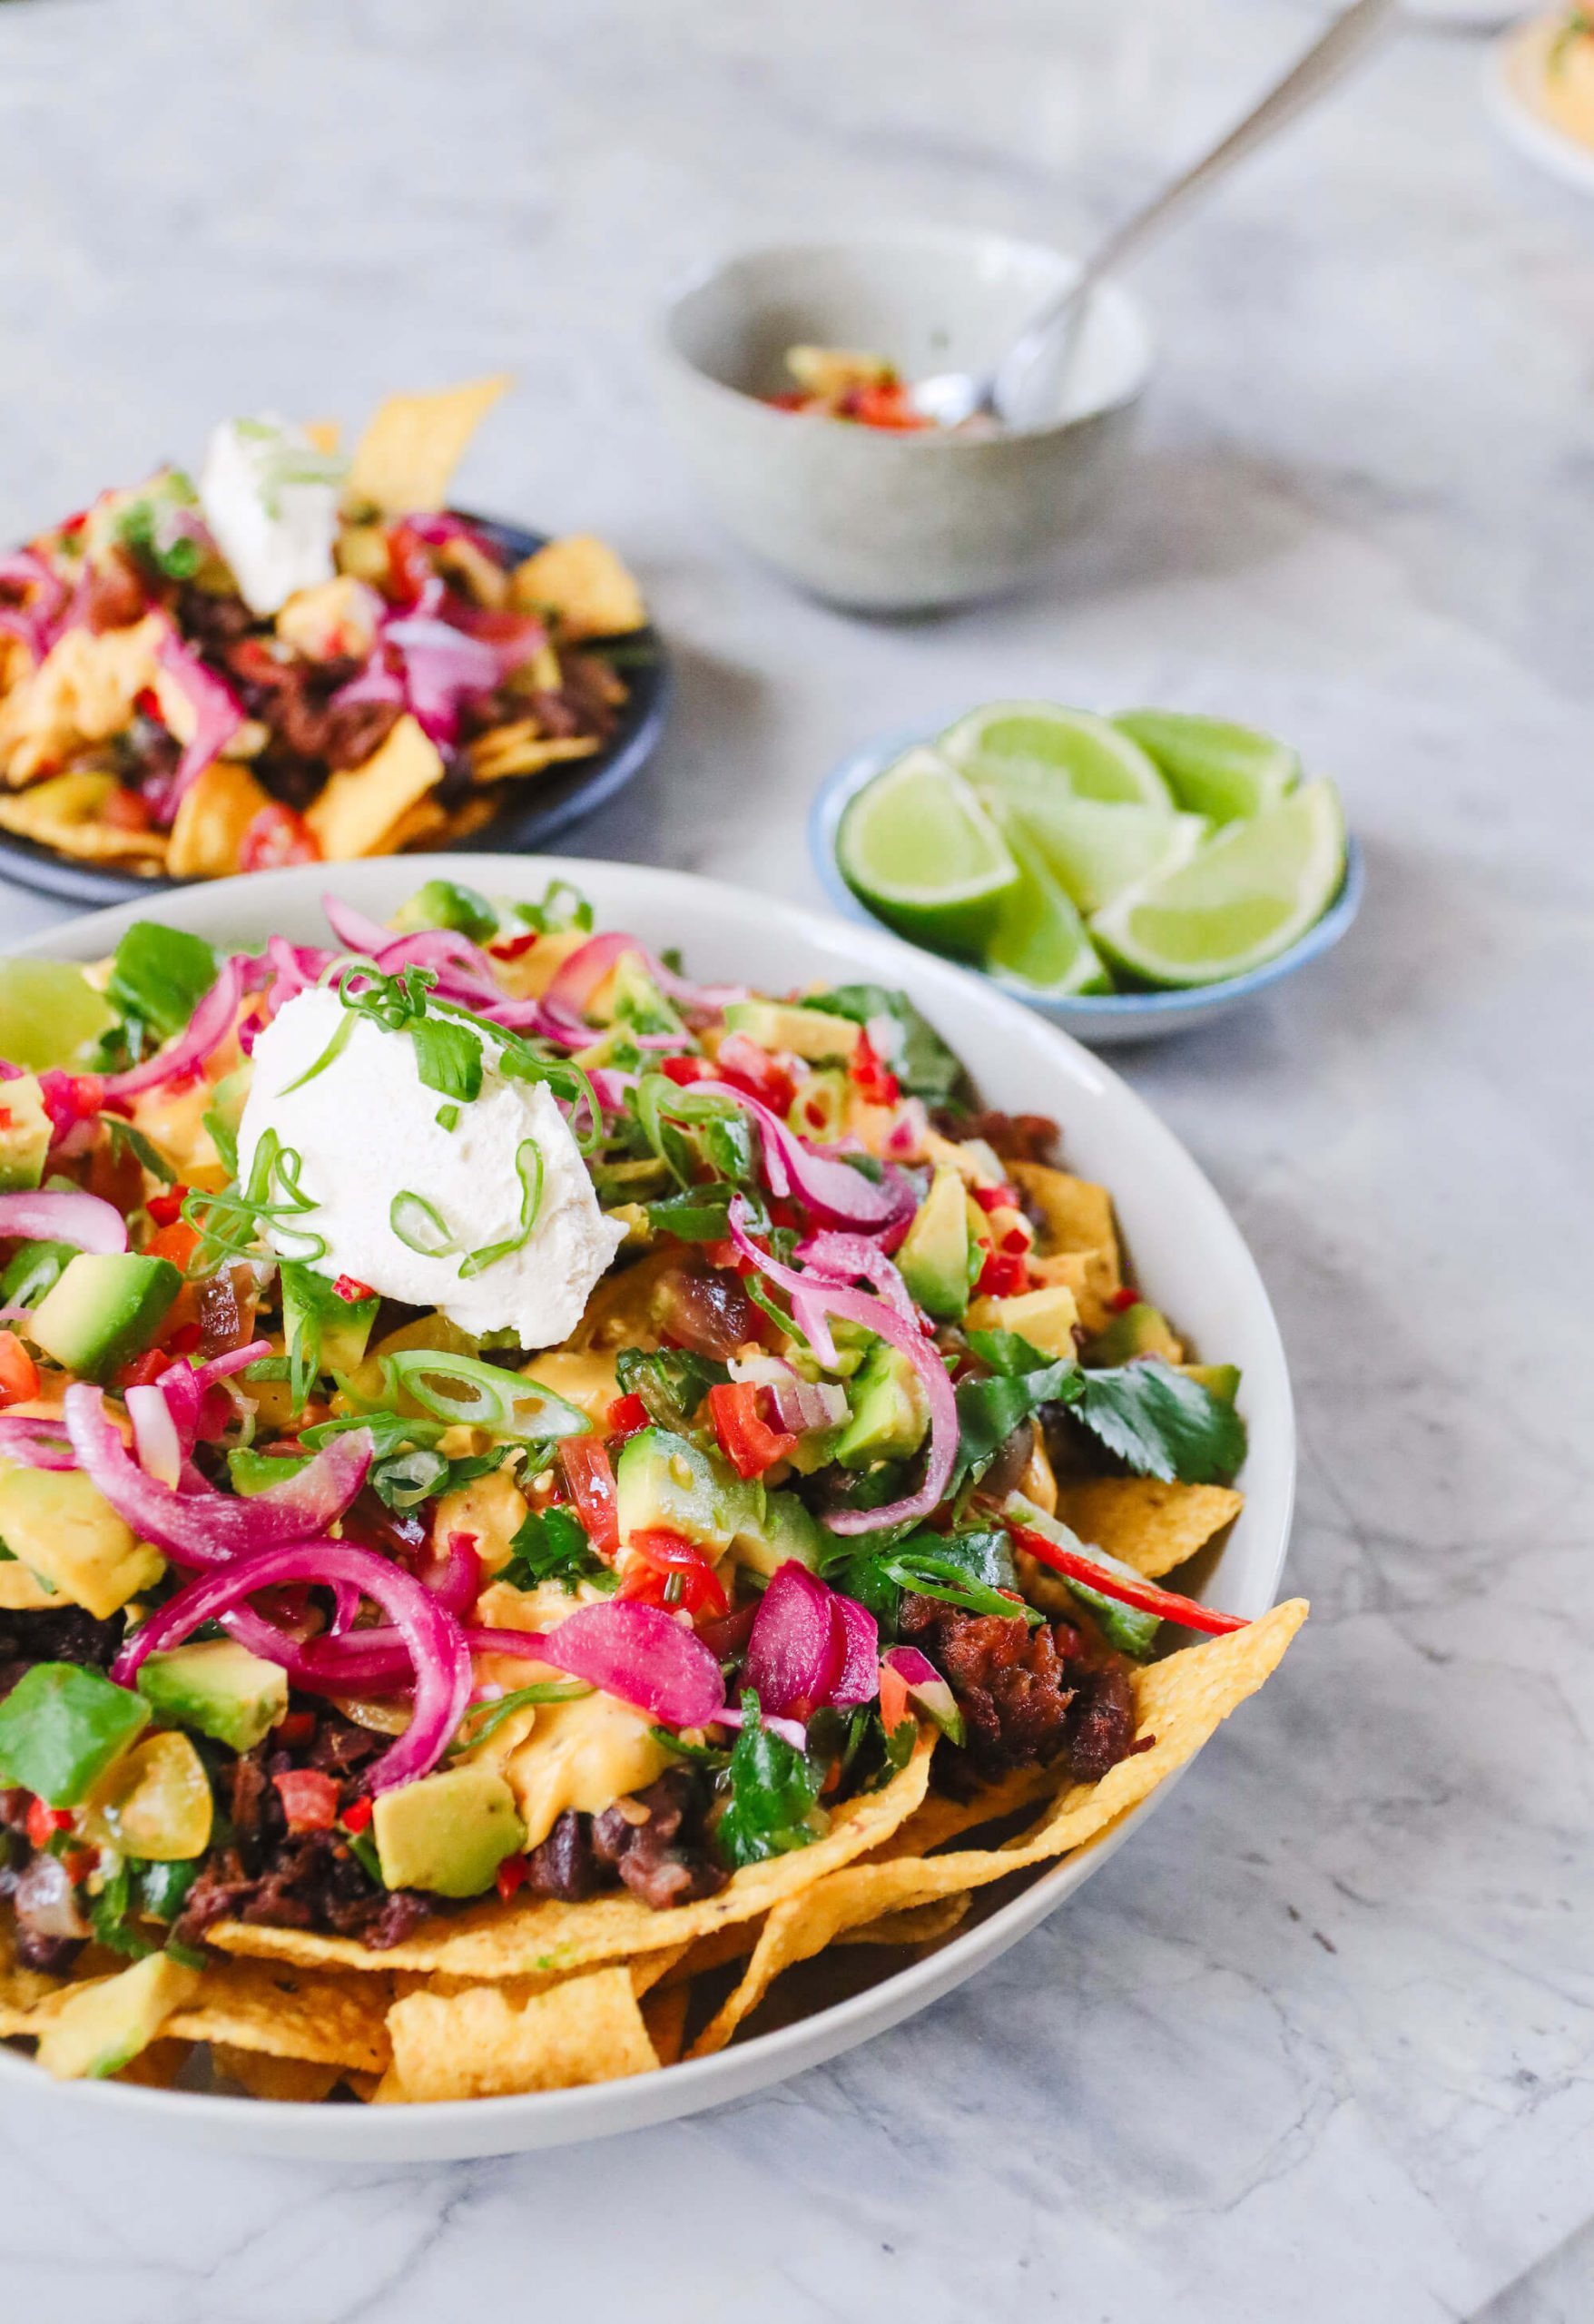 Fable Nachos with ‘Not-cho’ Cheese Sauce - Recipes - Fable | Real ...